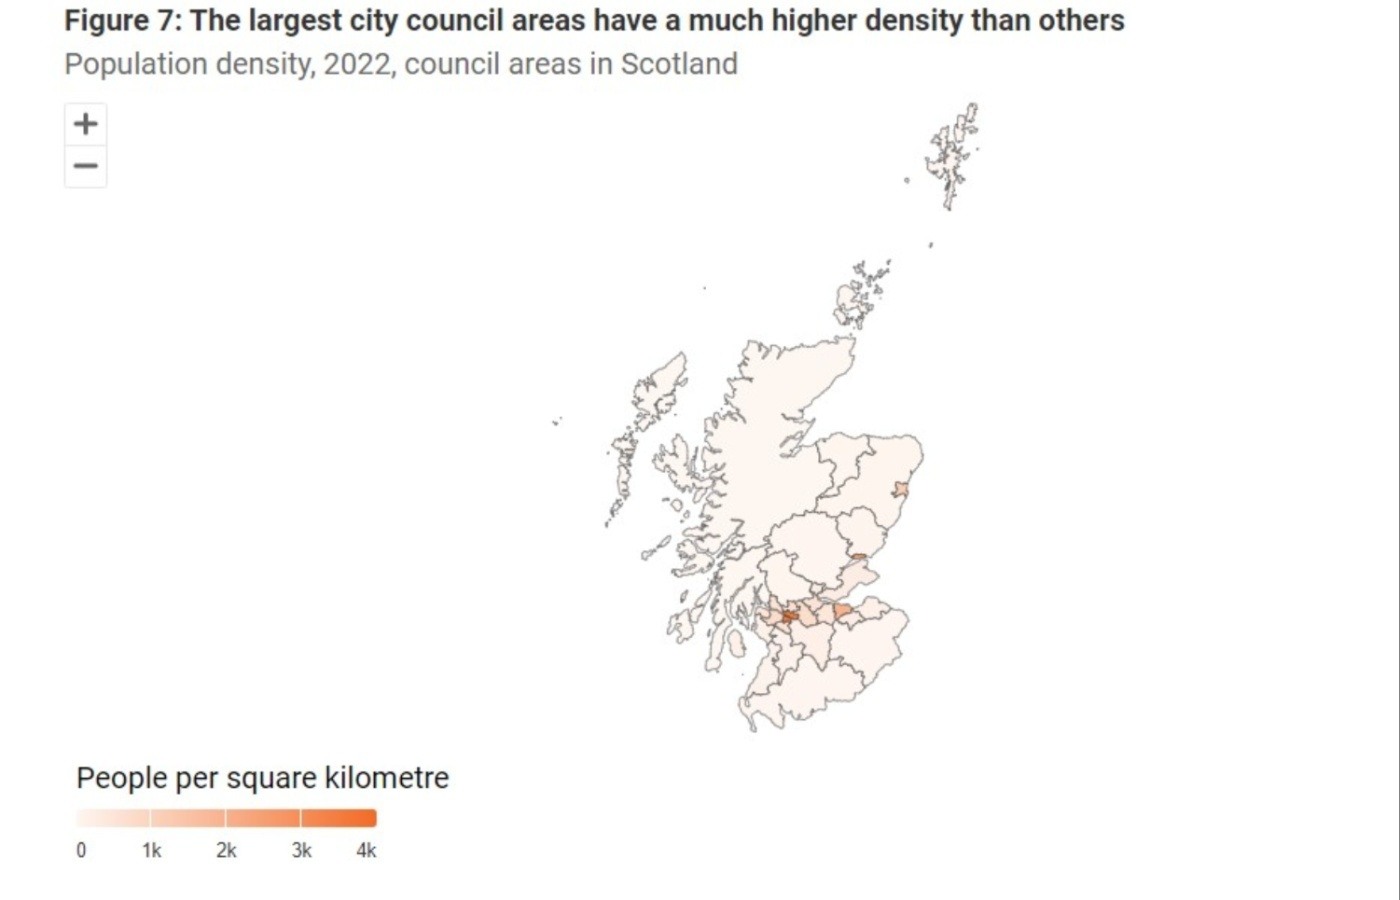 The map shows the population density by council area.